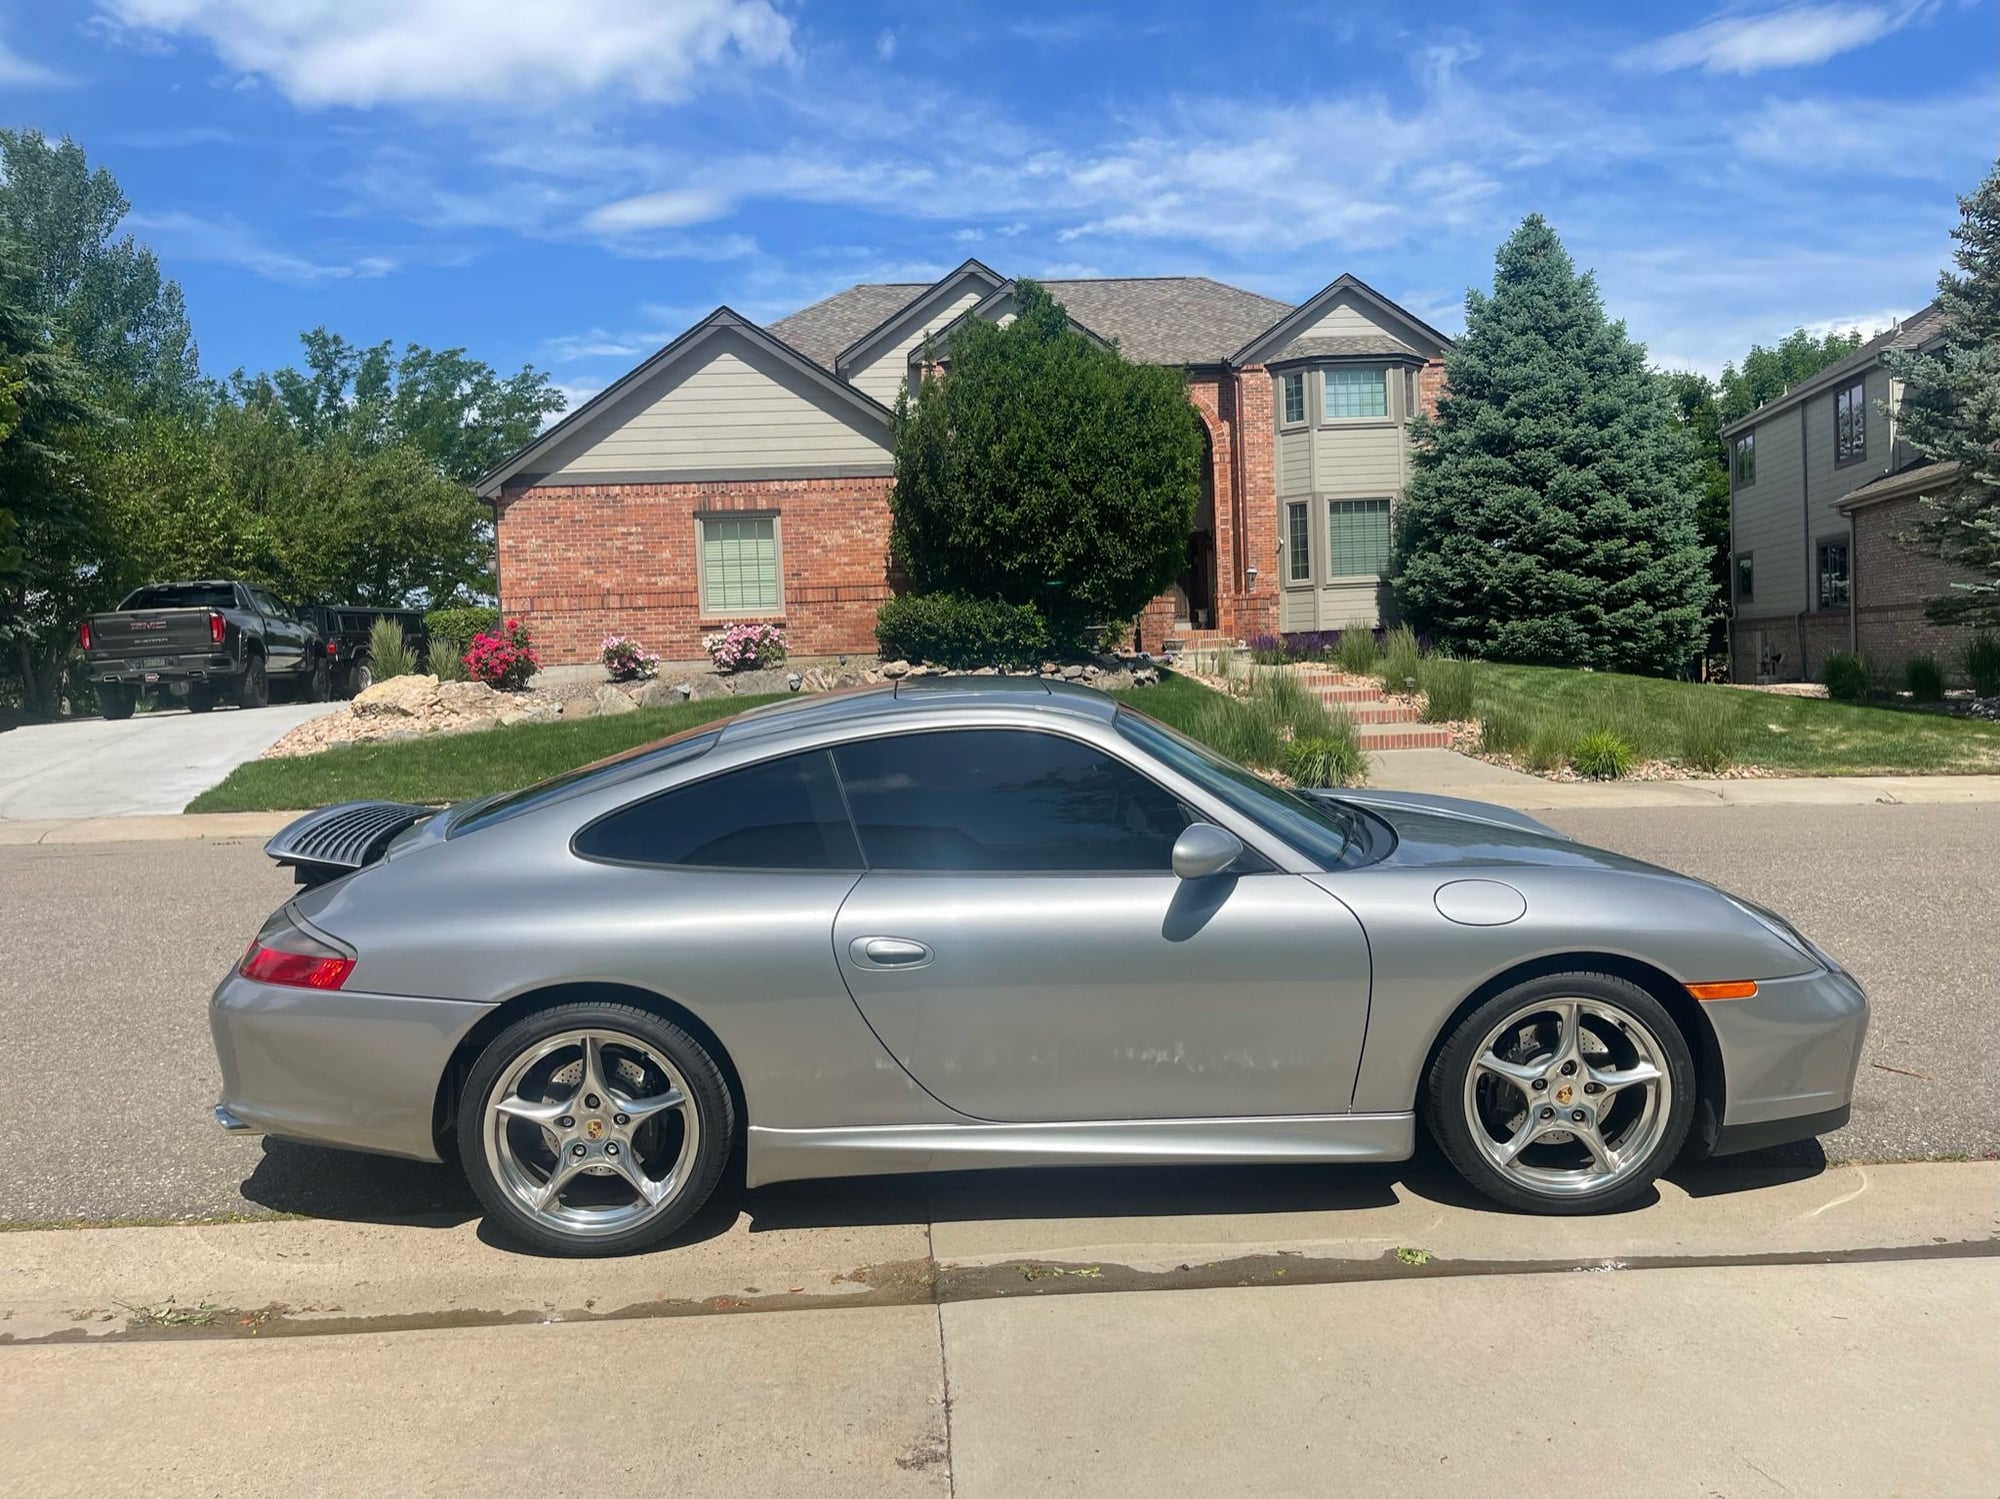 2004 Porsche 911 - 40th Anniversary Jahre 911 - Manual - One Owner - Numbered Car - Used - VIN WP0AA29974S621728 - 18,370 Miles - 2WD - Manual - Coupe - Silver - Denver, CO 80124, United States